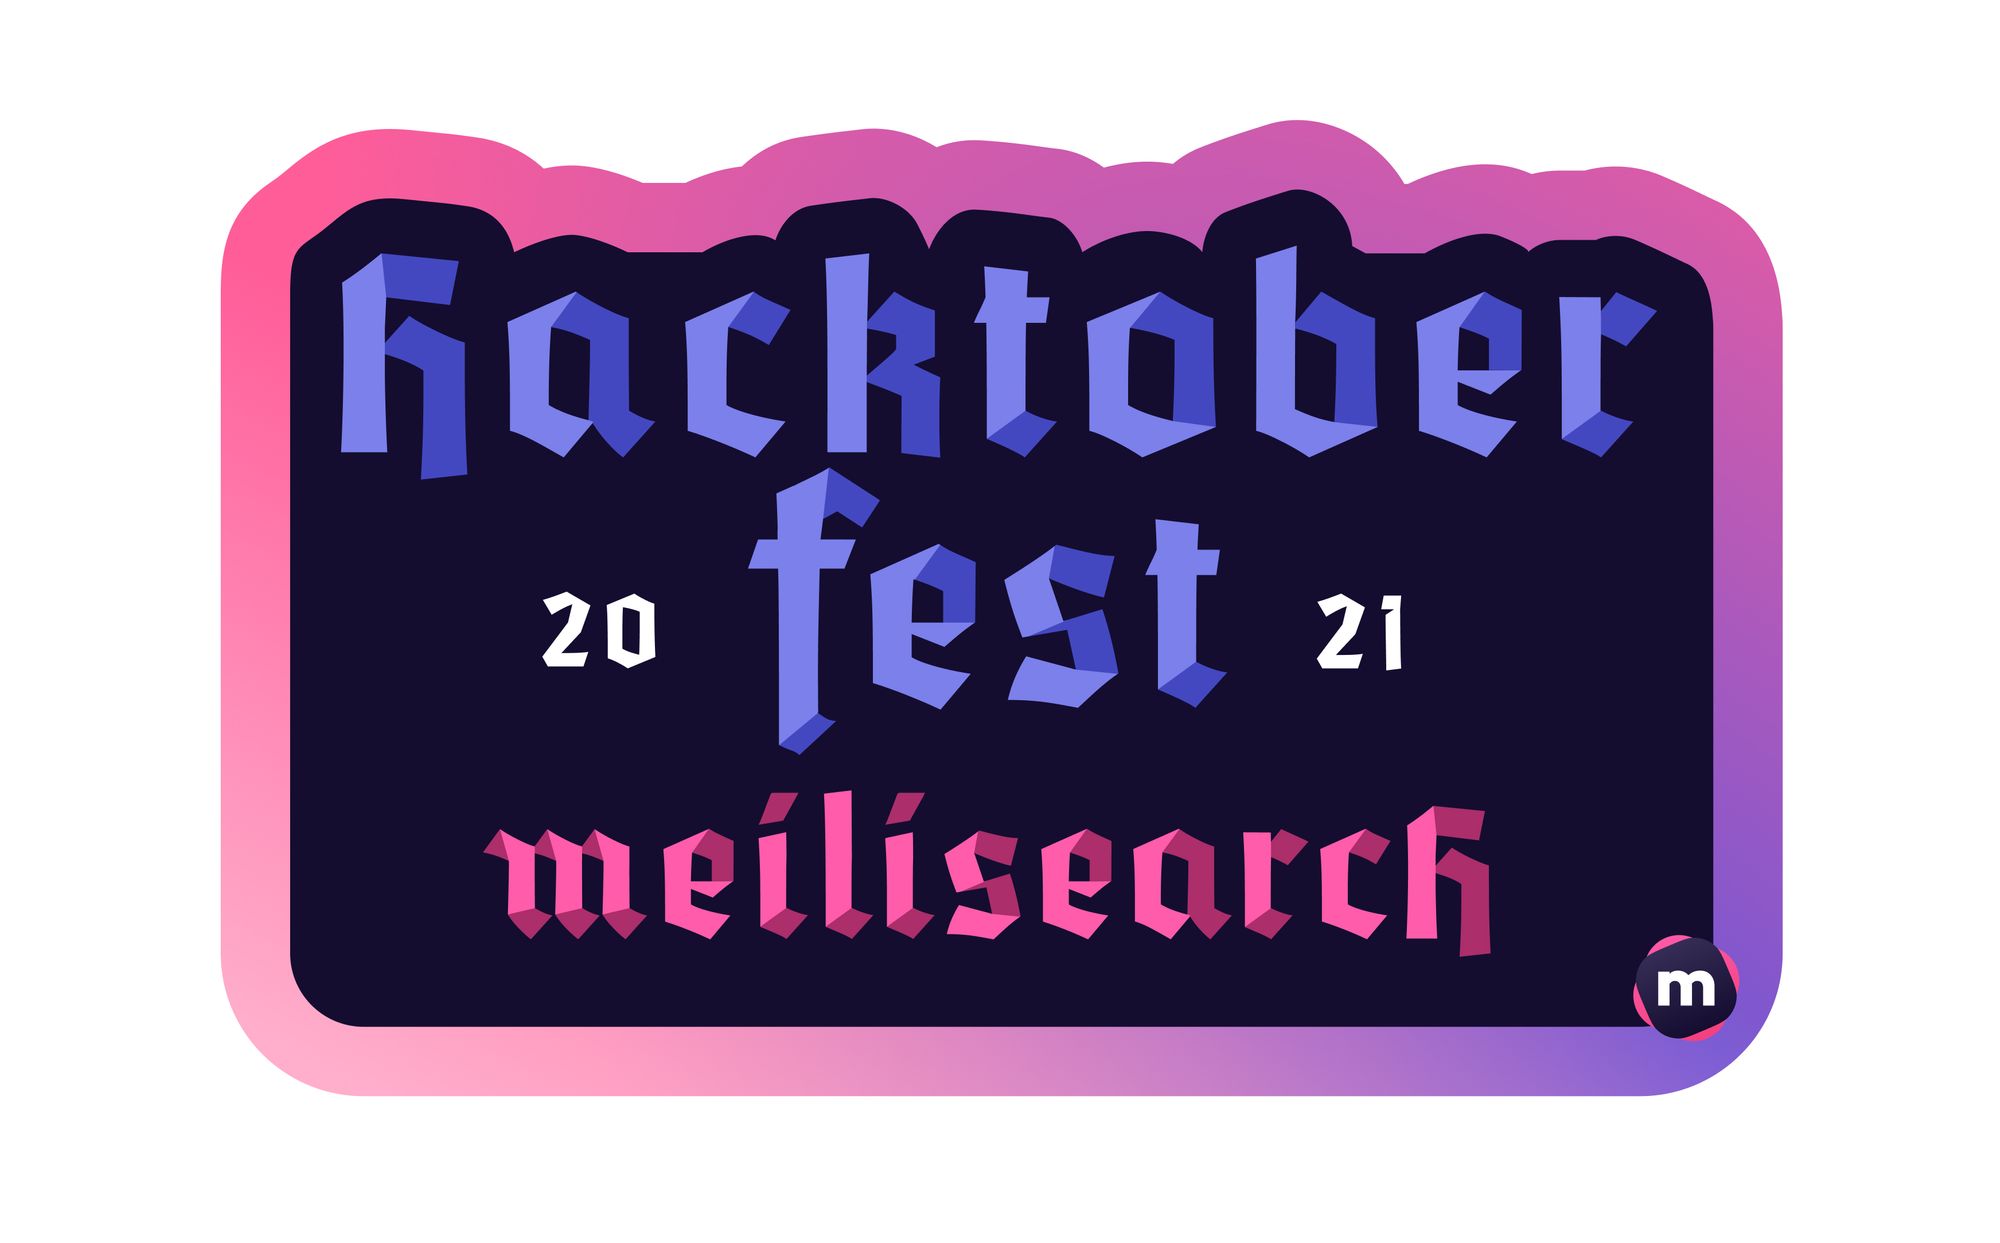 Contribute to Open Source during Hacktoberfest 2021